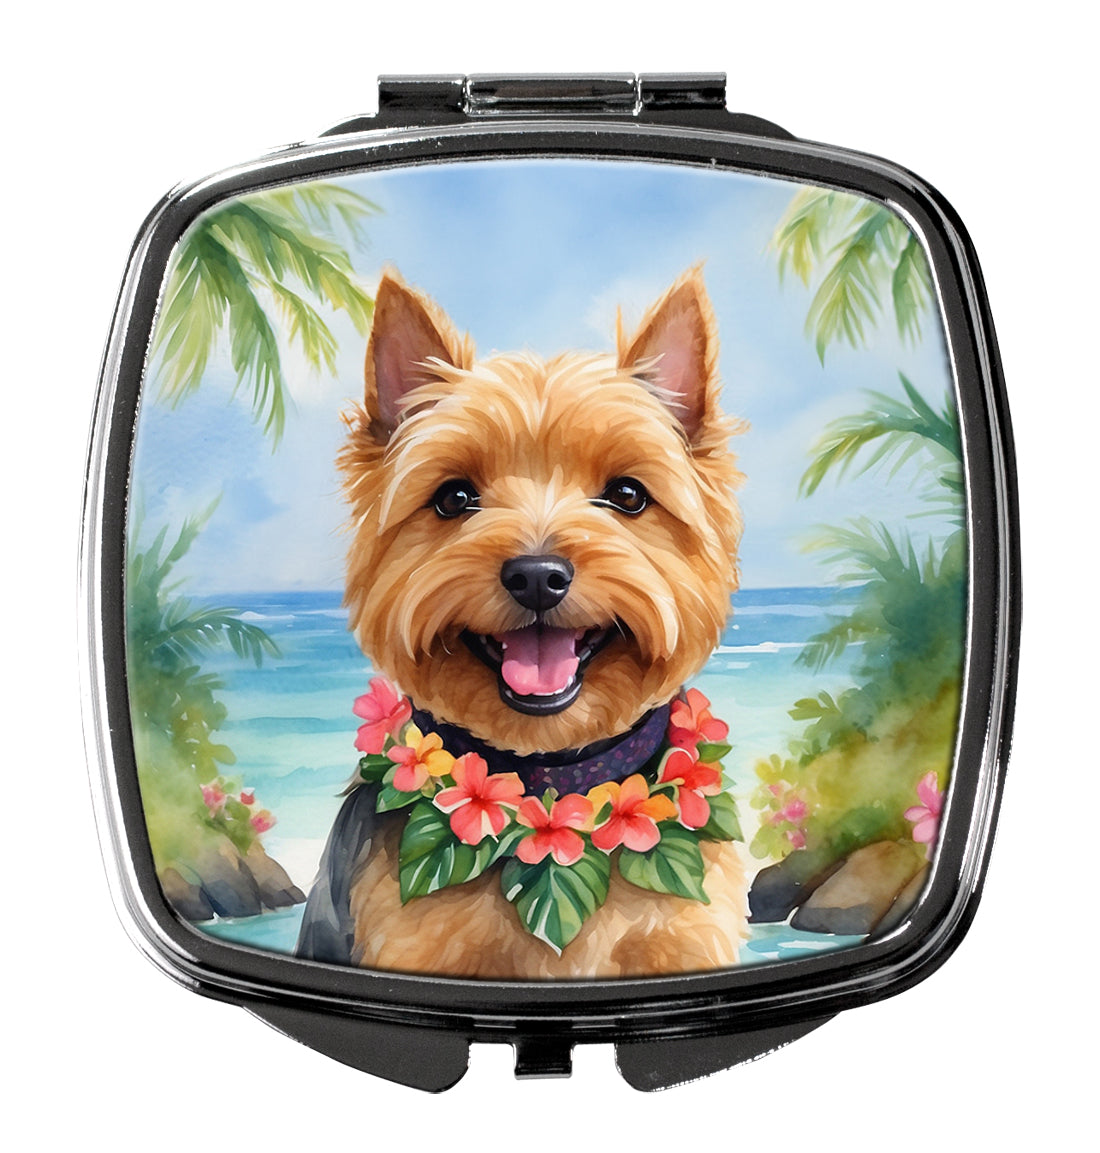 Buy this Norwich Terrier Luau Compact Mirror